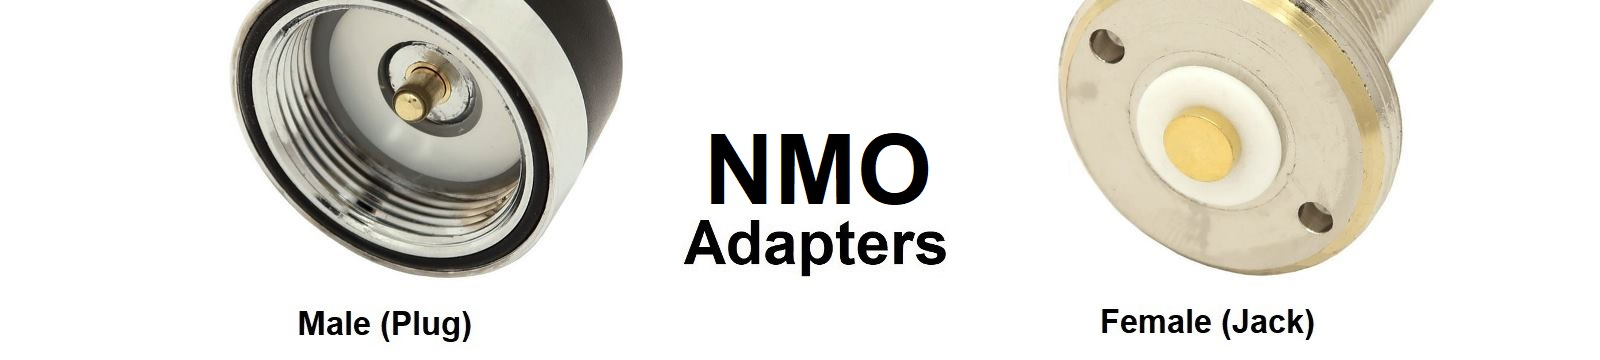 NMO Adapters Category Banner - Max-Gain Systems, Inc.